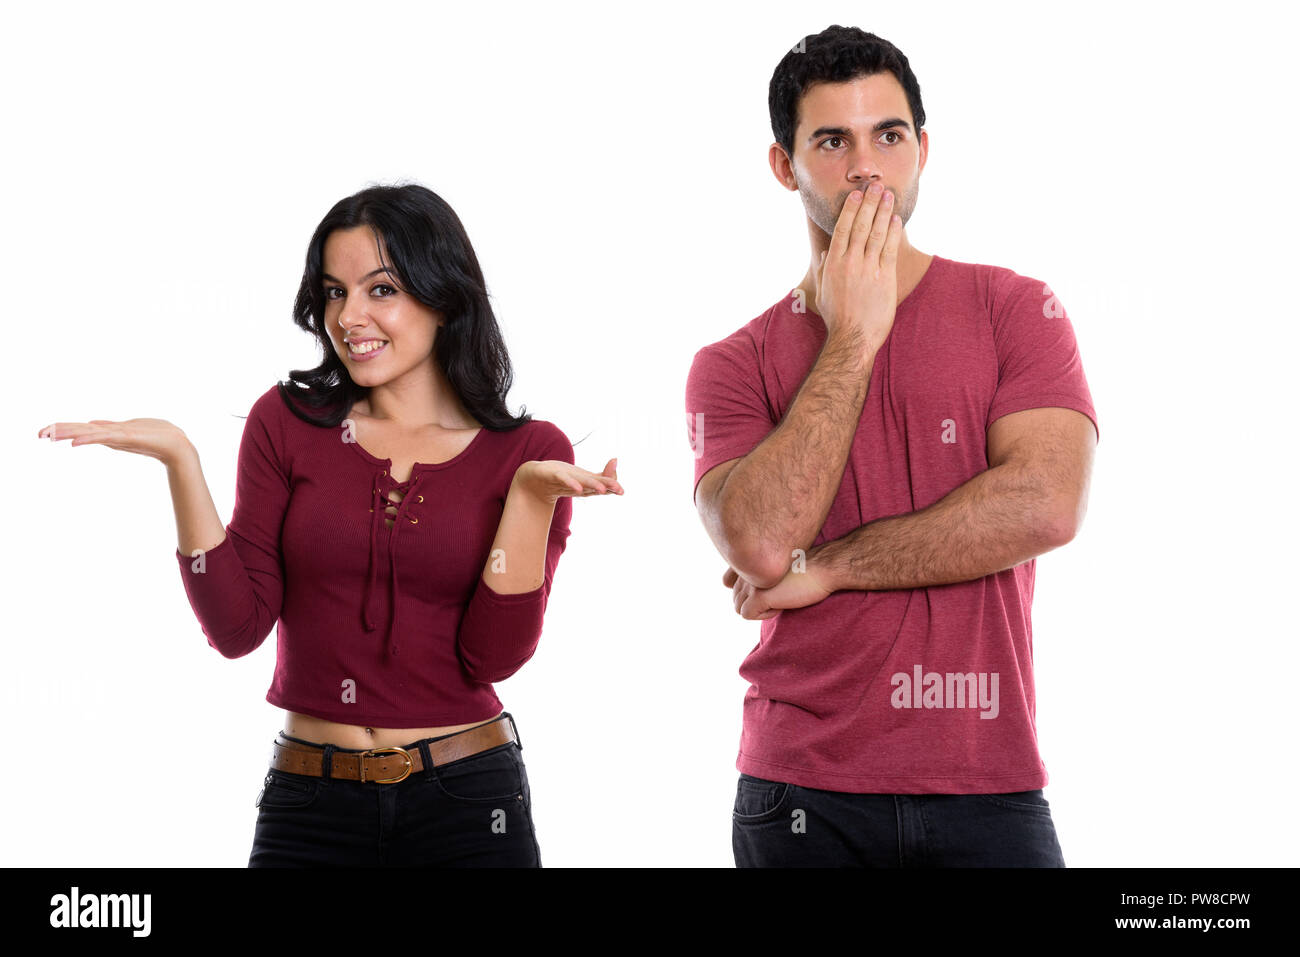 Studio shot of young happy couple smiling with woman shrugging a Stock Photo